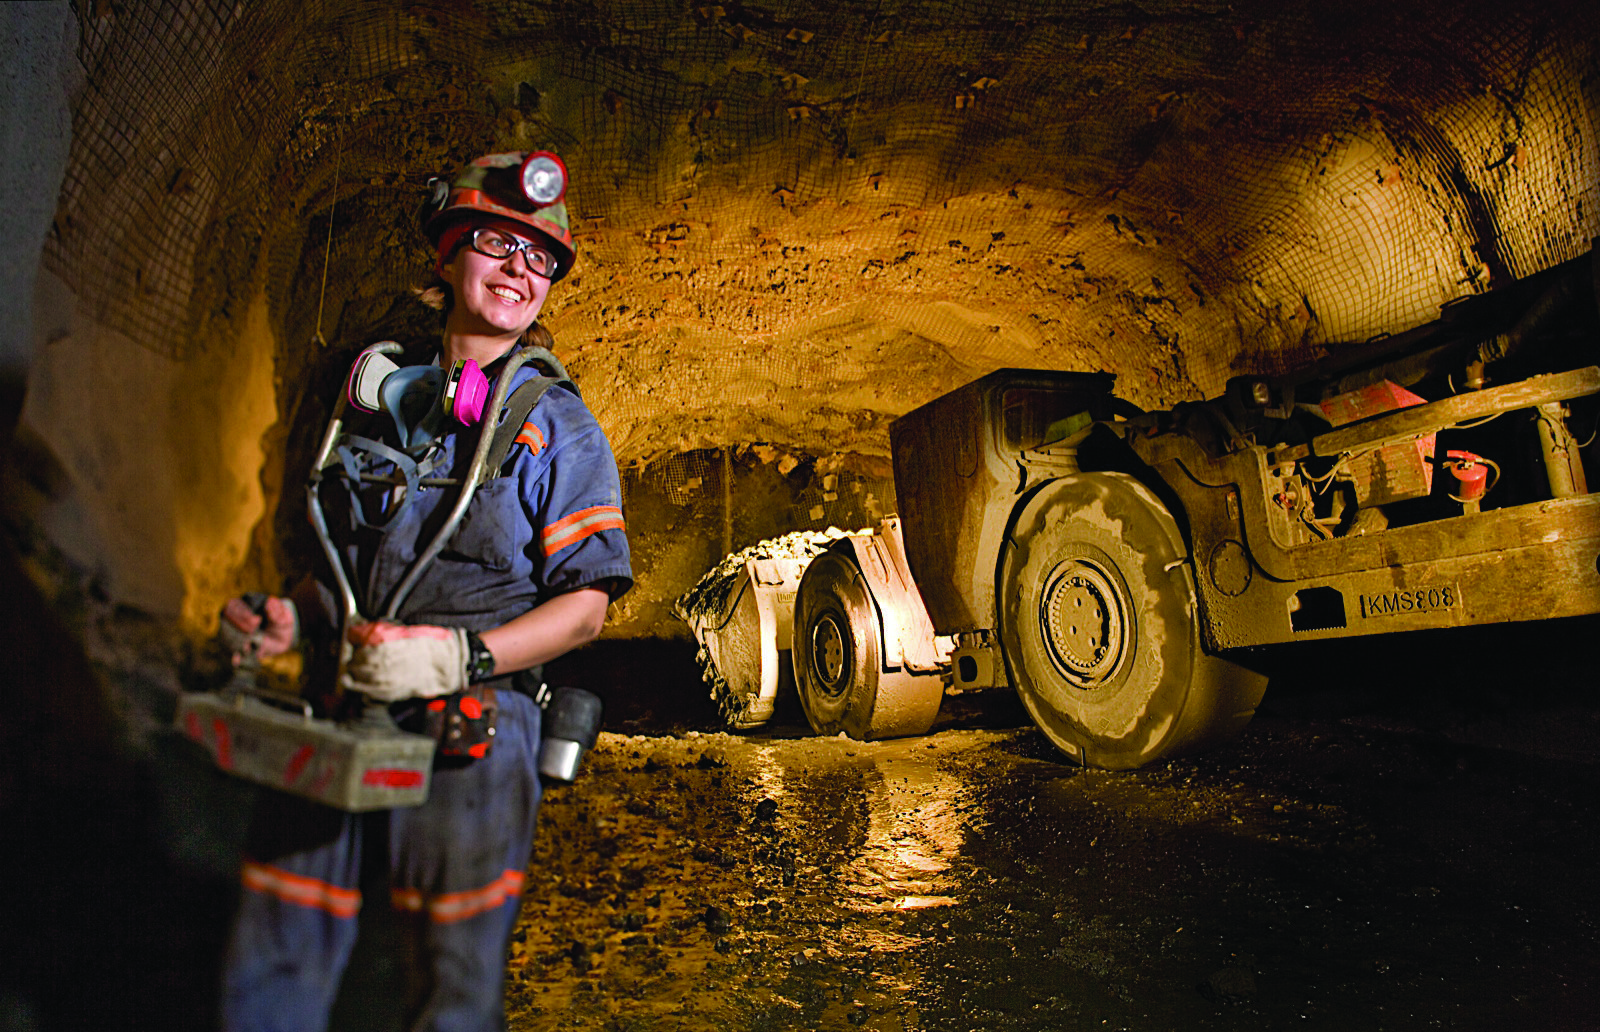 Mining companies are using RFID solutions to manage mining equipment and optimize operational efficiency